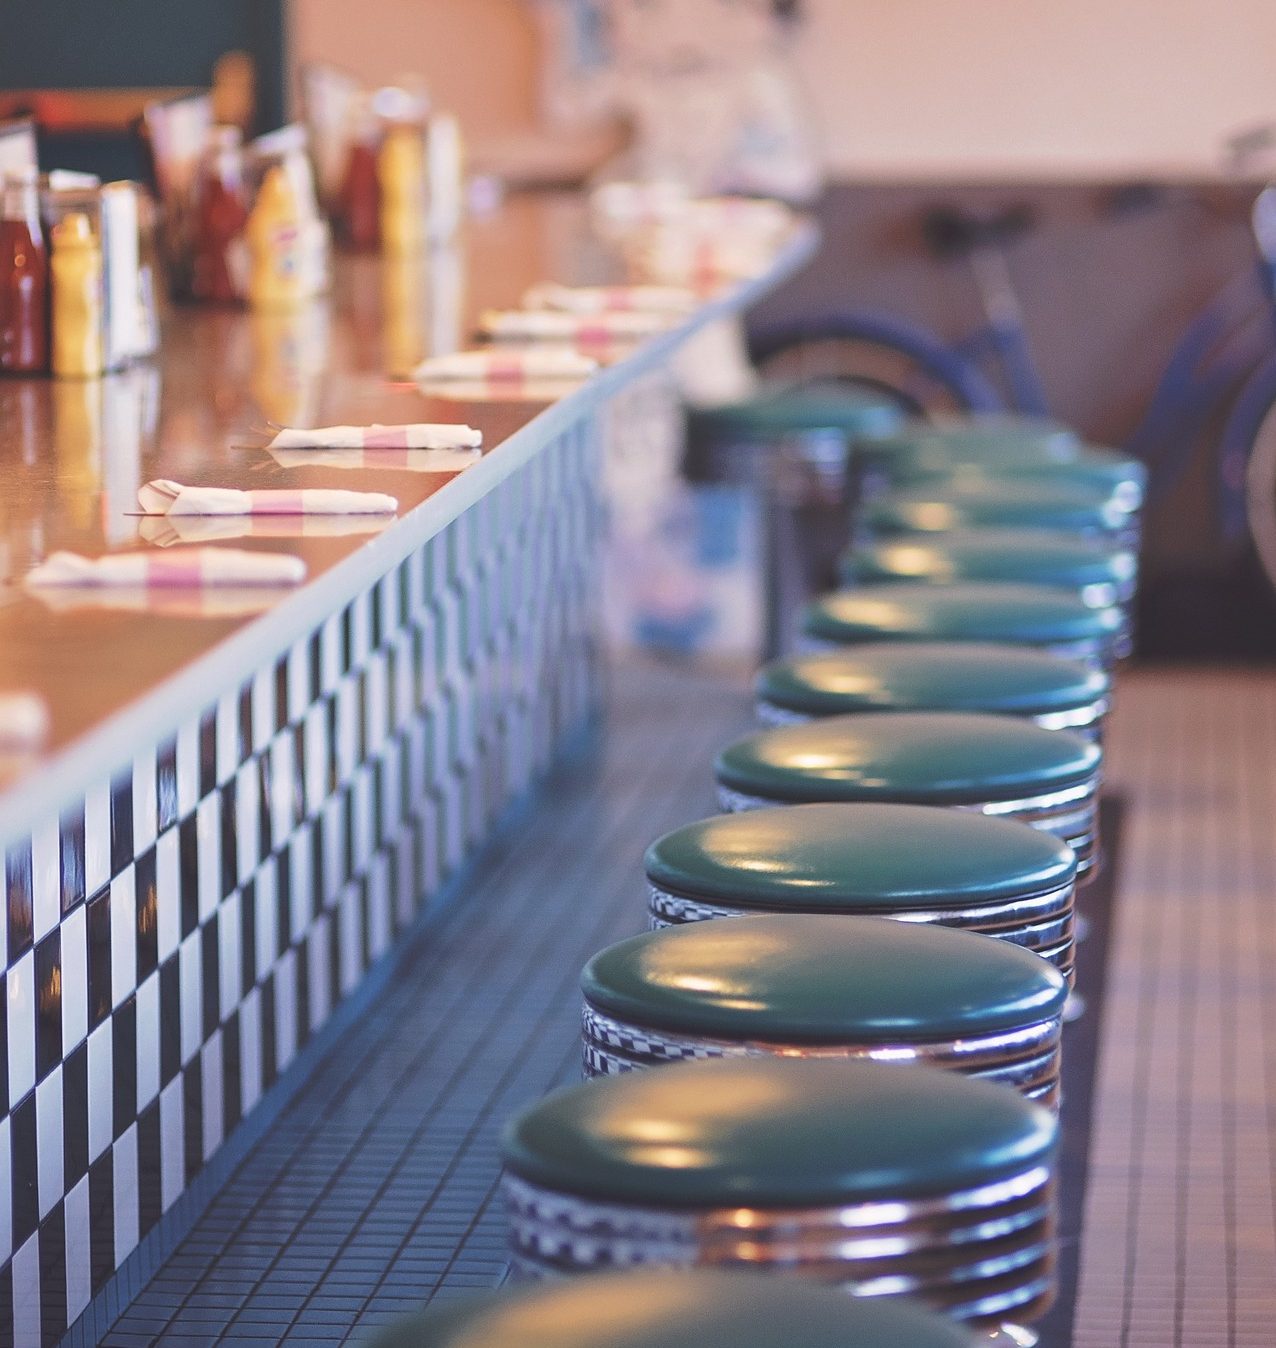 Stools in a retro diner